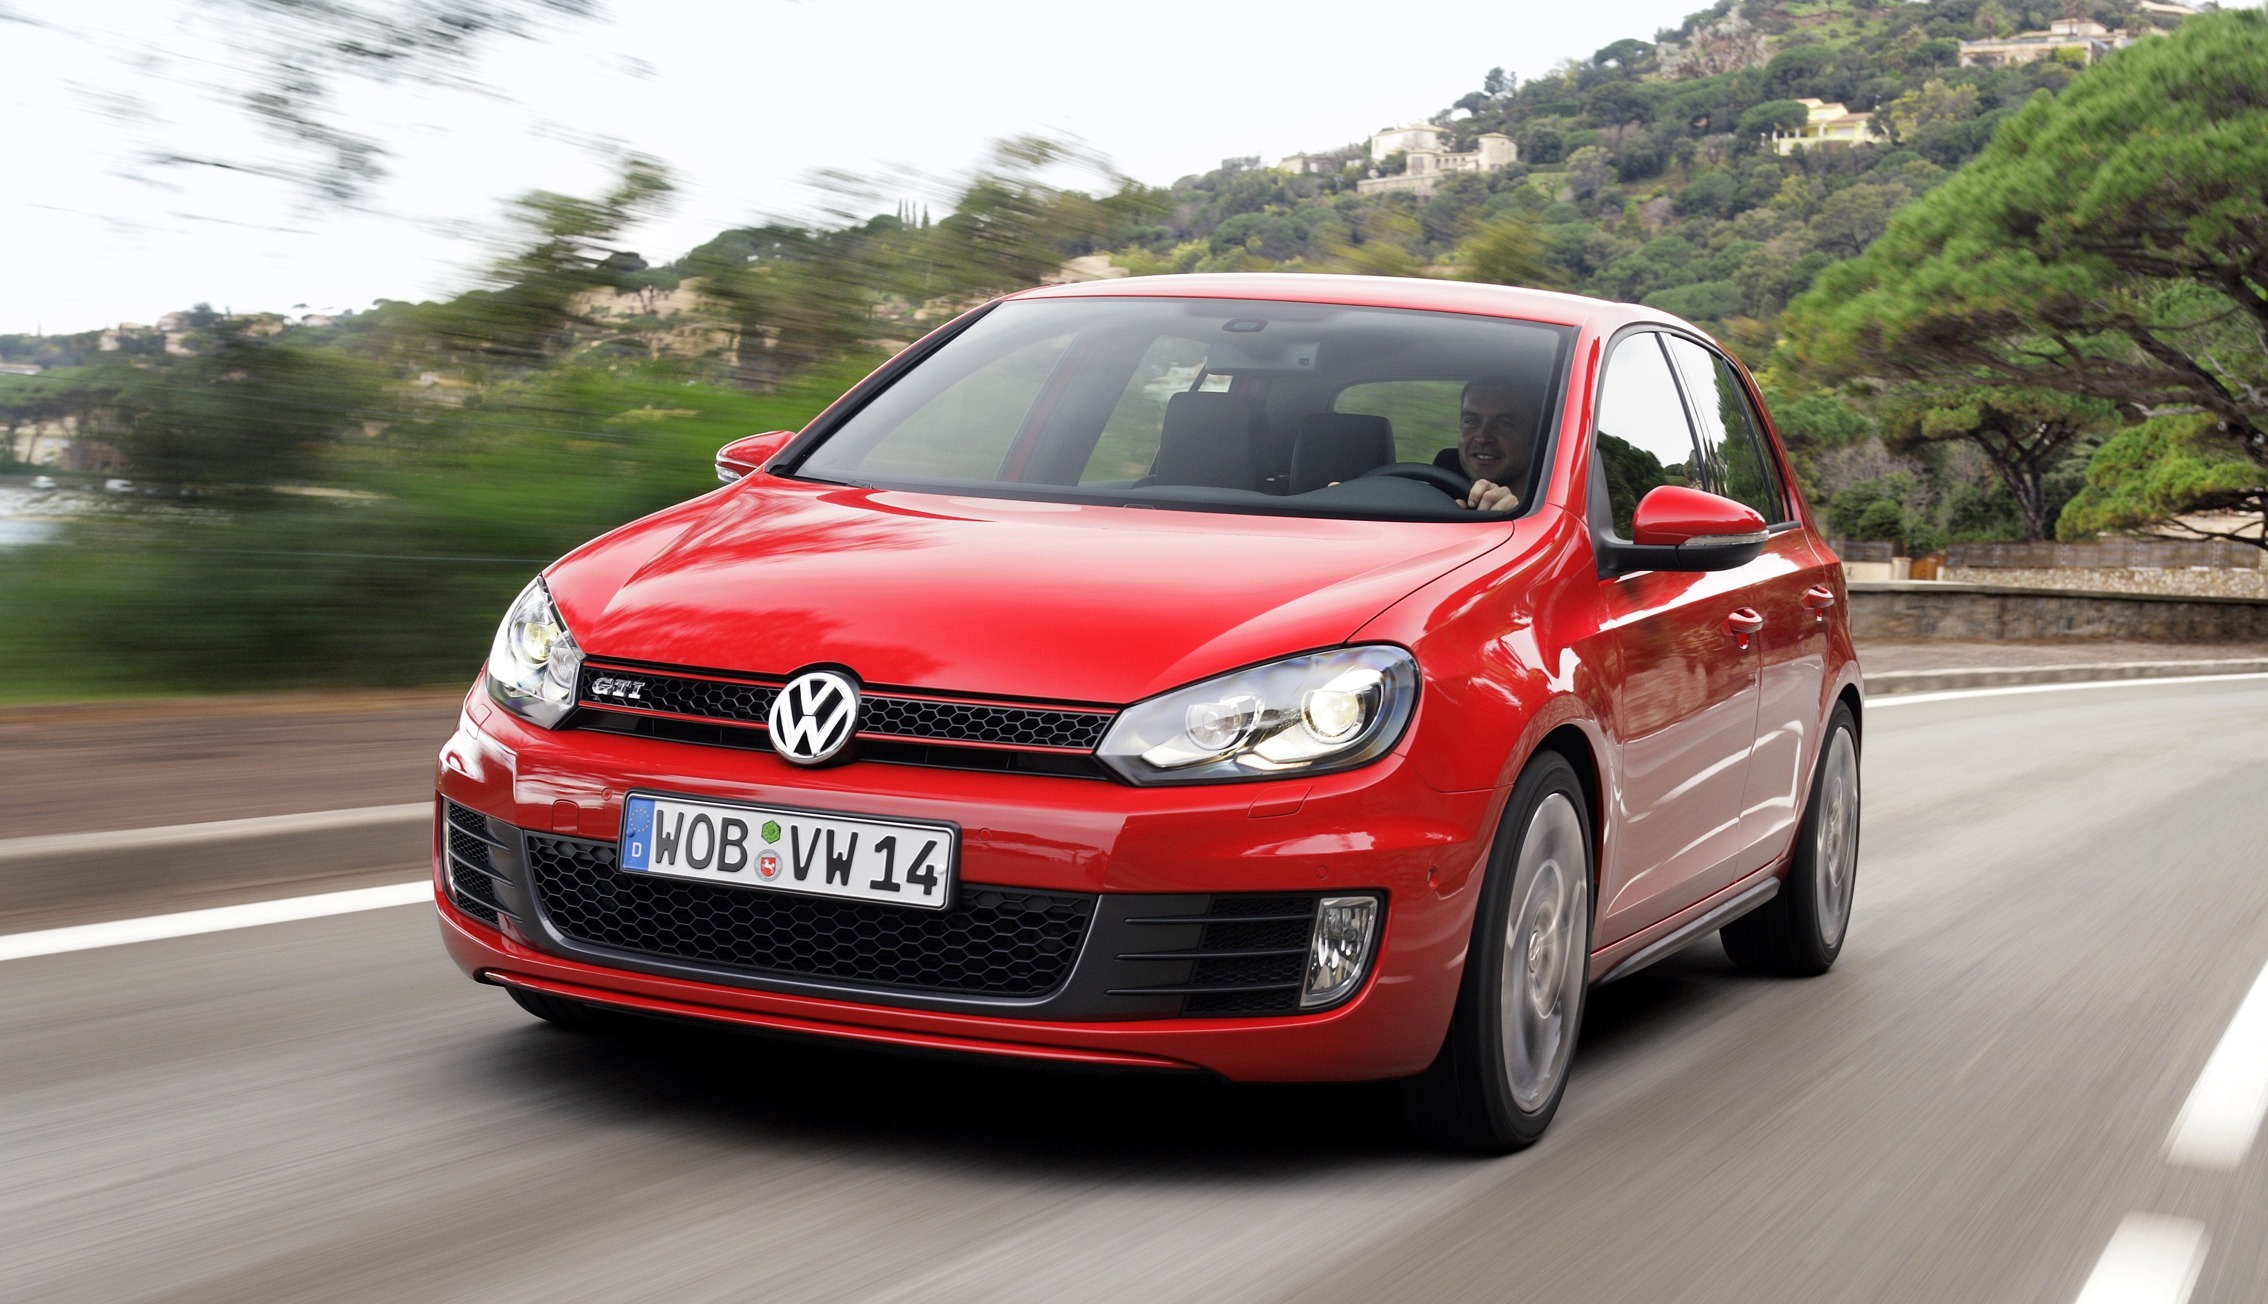 The VW Golf is a classy choice with a range of petrol and diesel engines